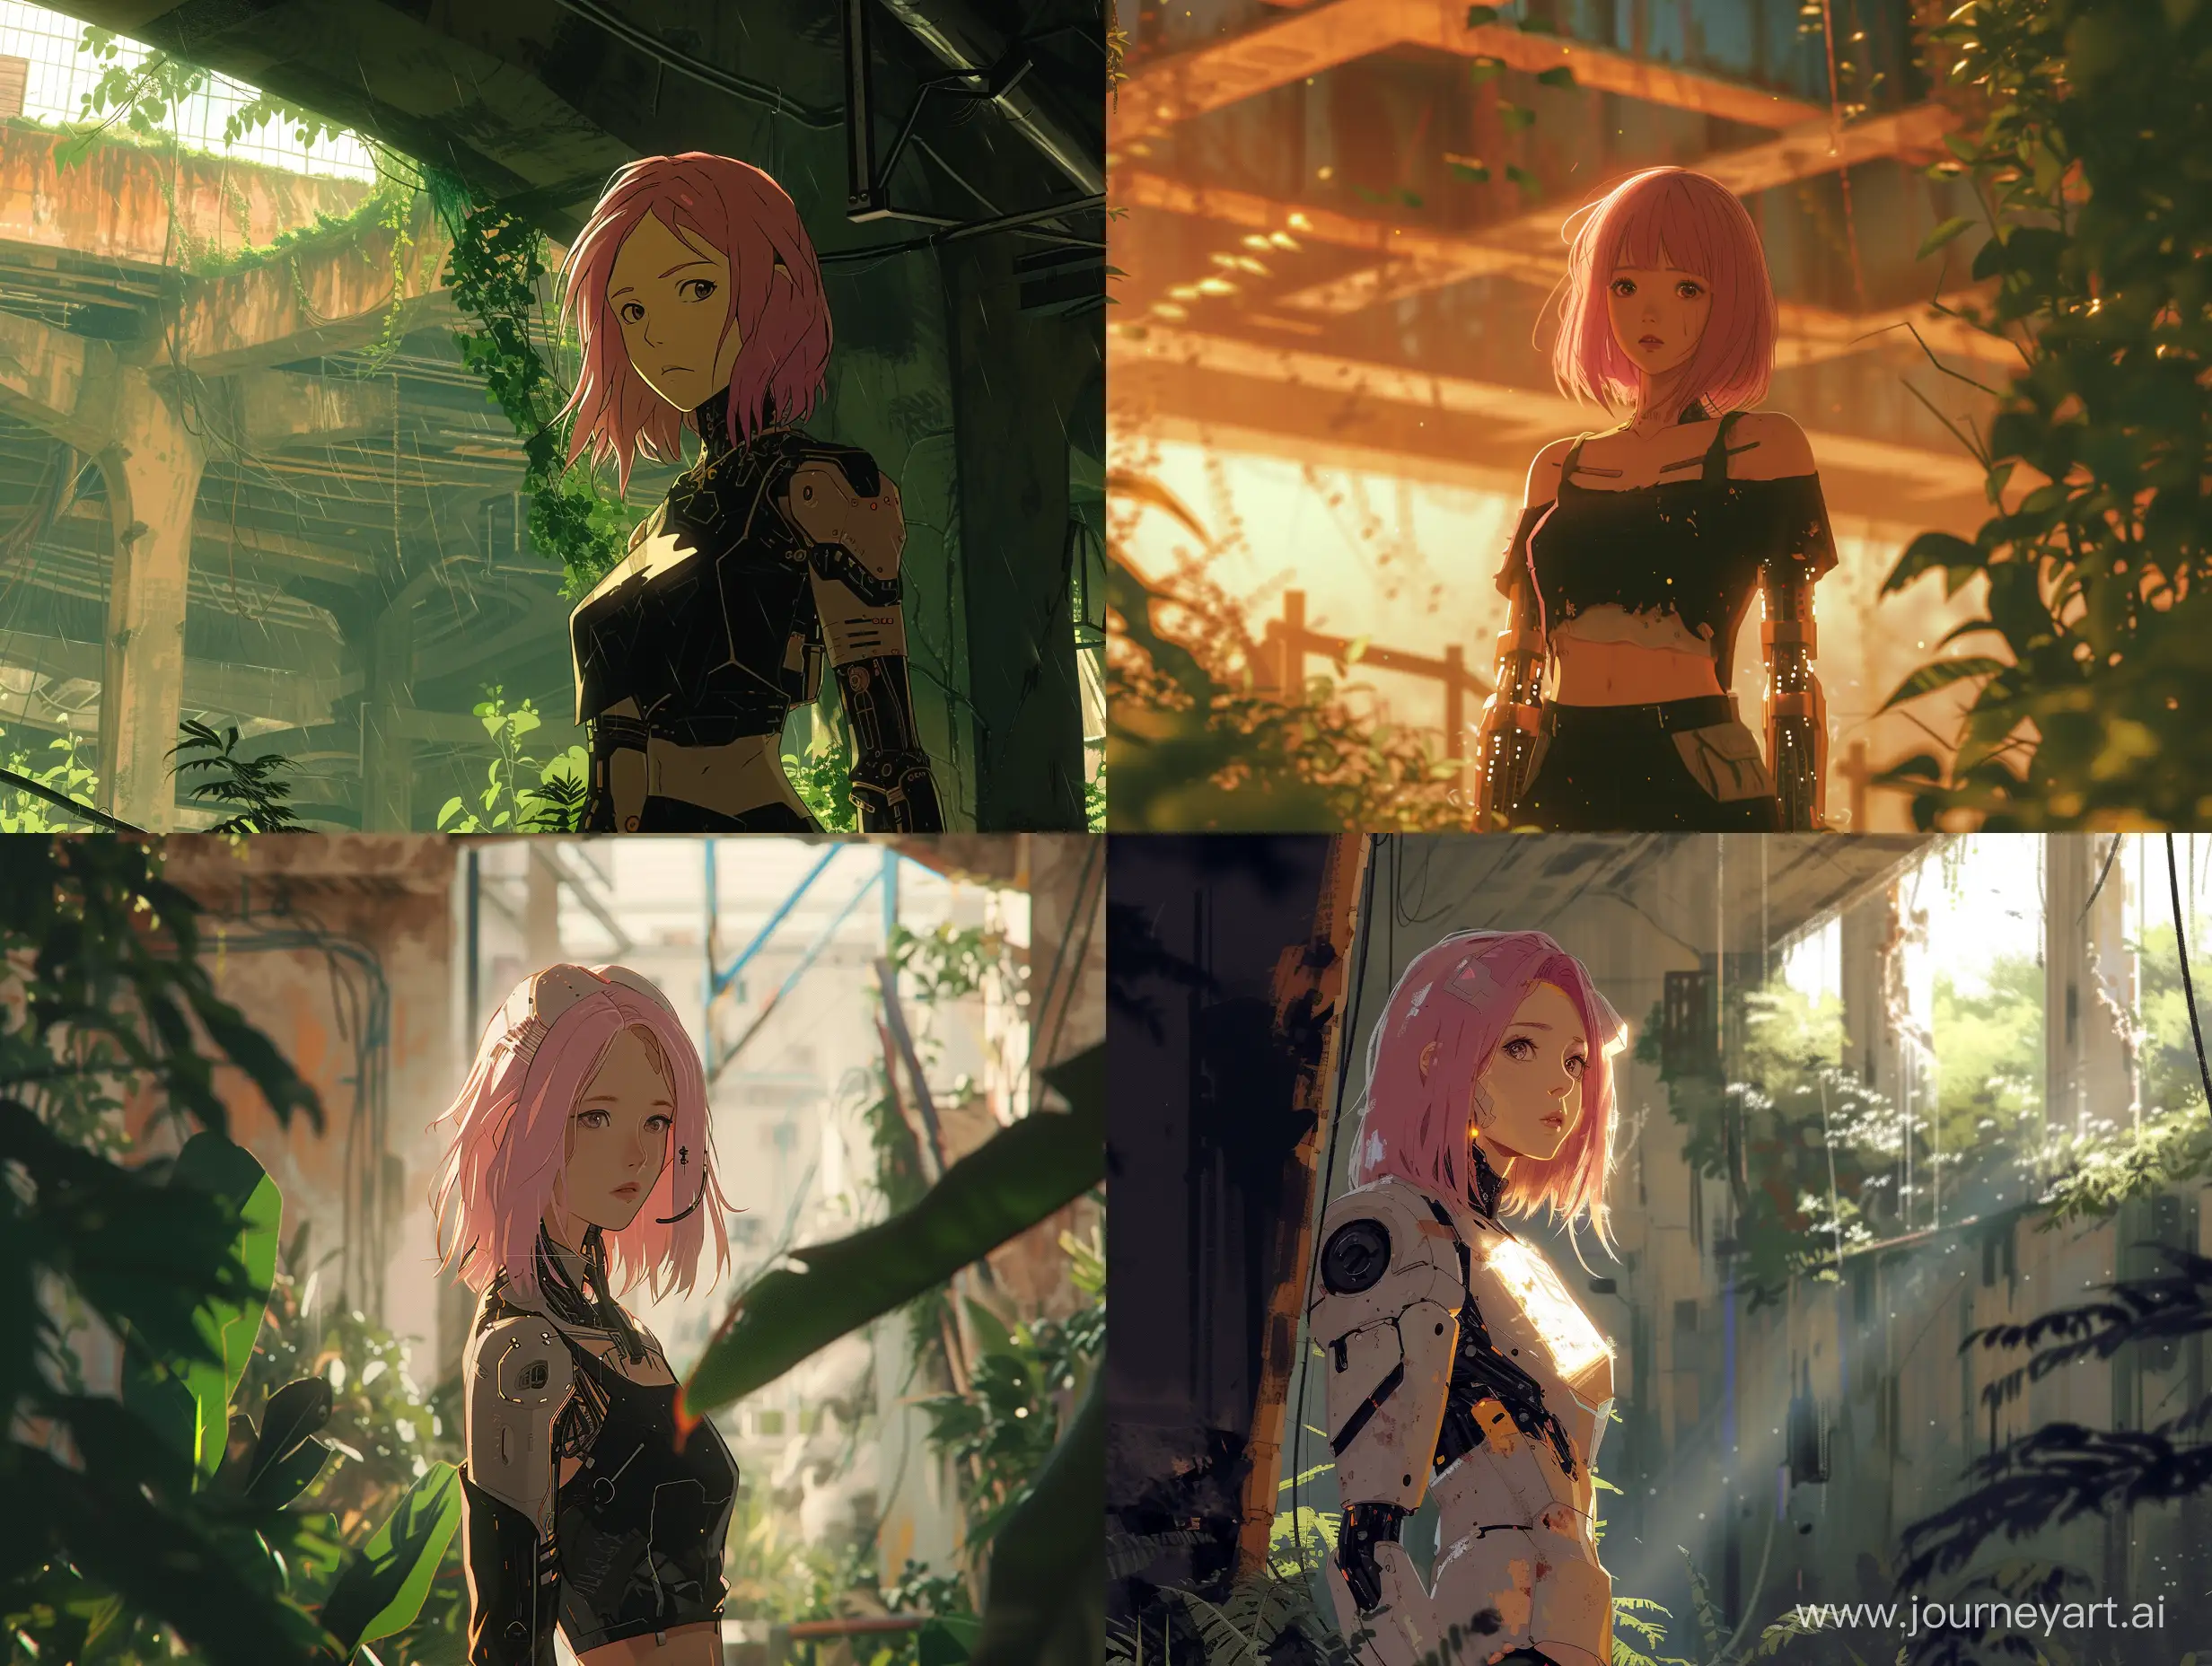 A 4k anime cartoon still featuring a cyborg woman standing in an environment, looking at the viewer. The visuals are very detailed and nostalgic, with a cyberpunk and dystopian aesthetic. The scene is illuminated with natural lighting, and the woman has pink hair, creating a dreamy and vivid atmosphere.

